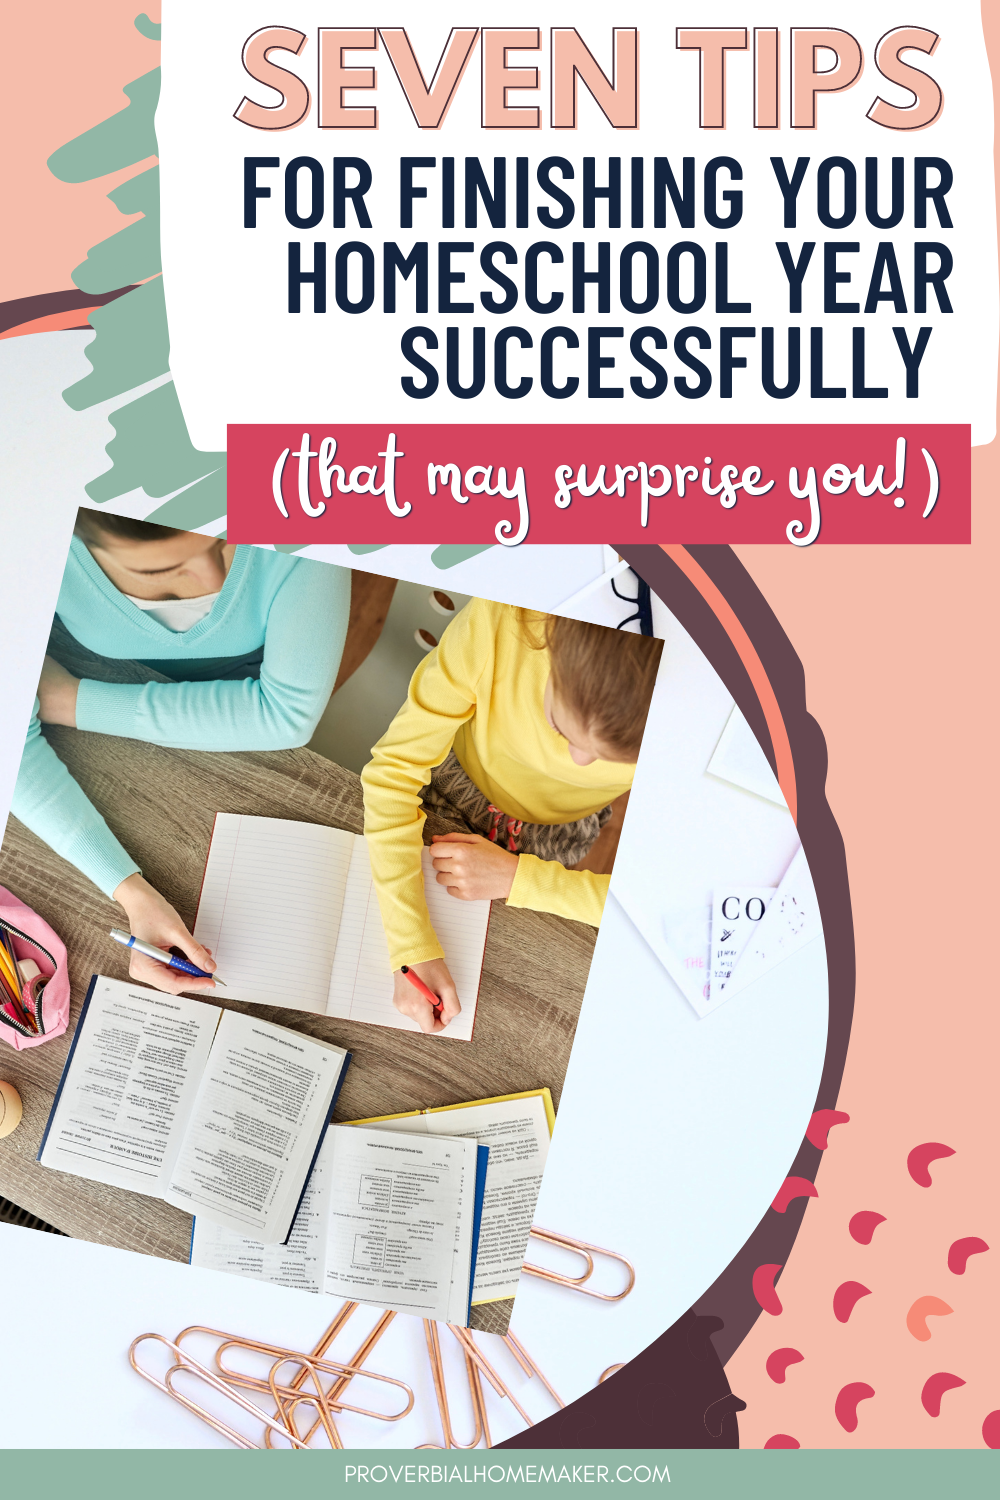 Sail into the end of the school year with confidence! 7 tips for finishing your homeschool year successfully. (Some of these tips may surprise you!)